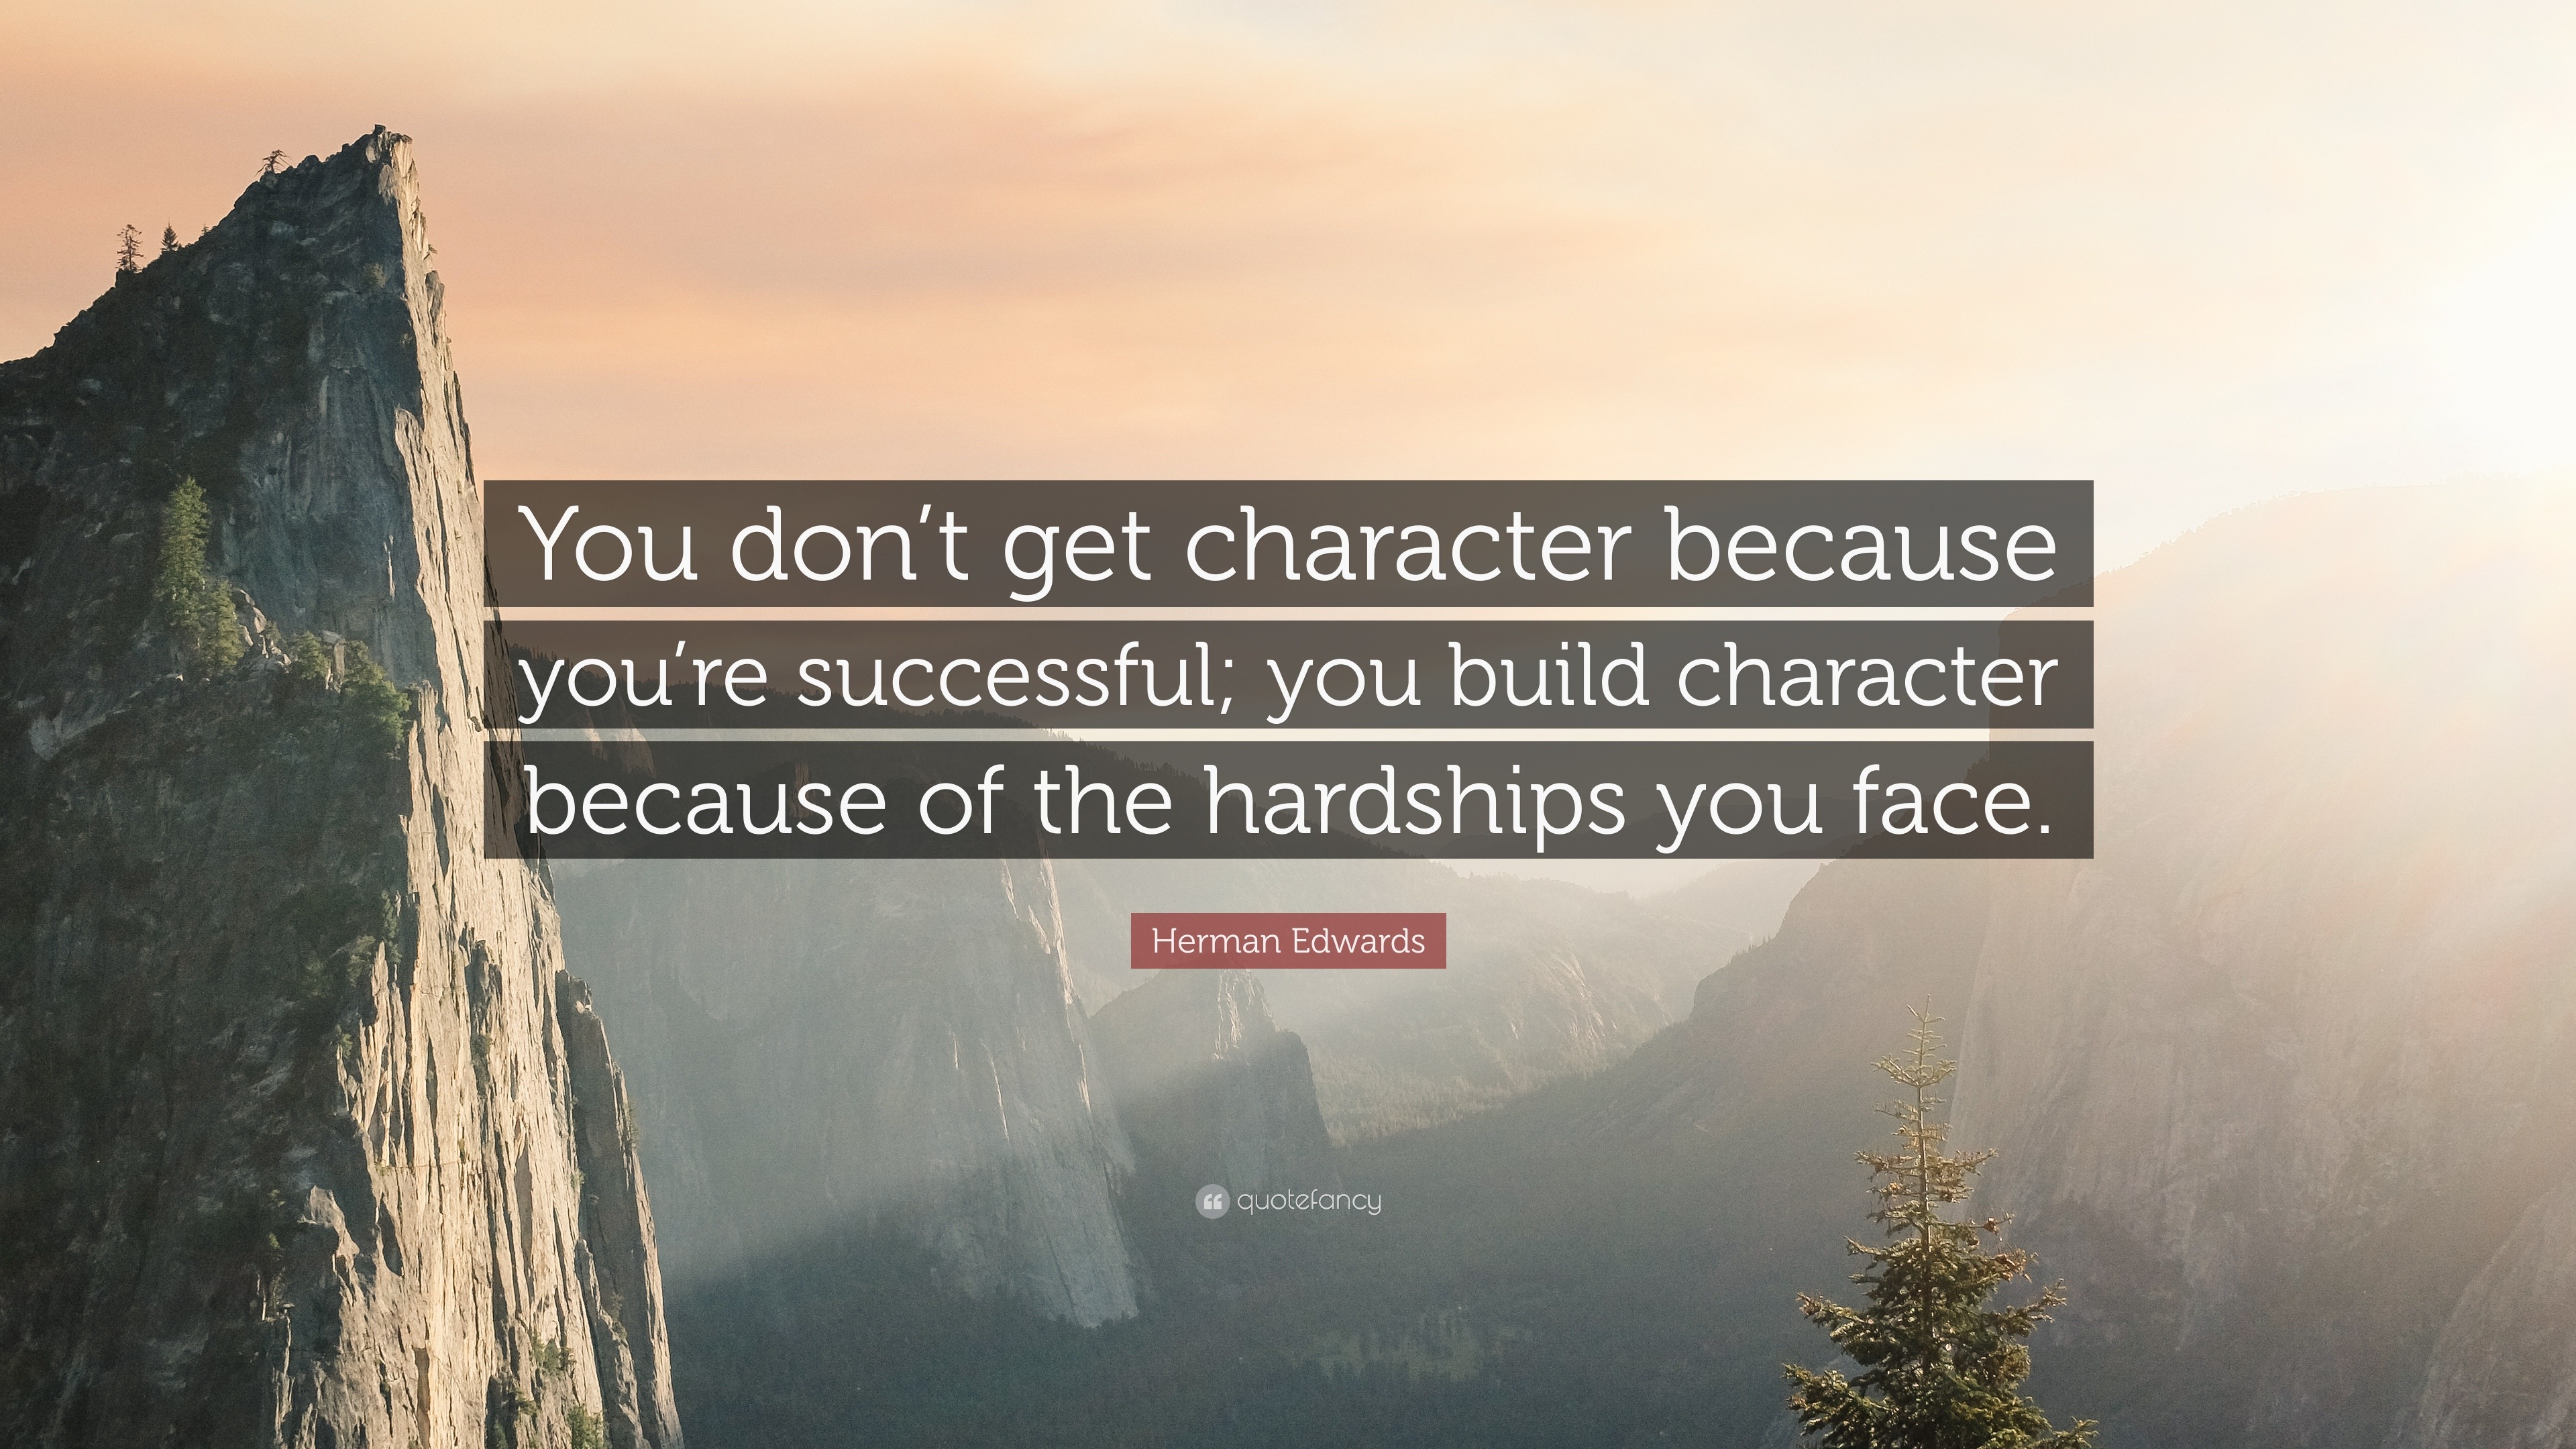 Herman Edwards Quote: “You don’t get character because you’re